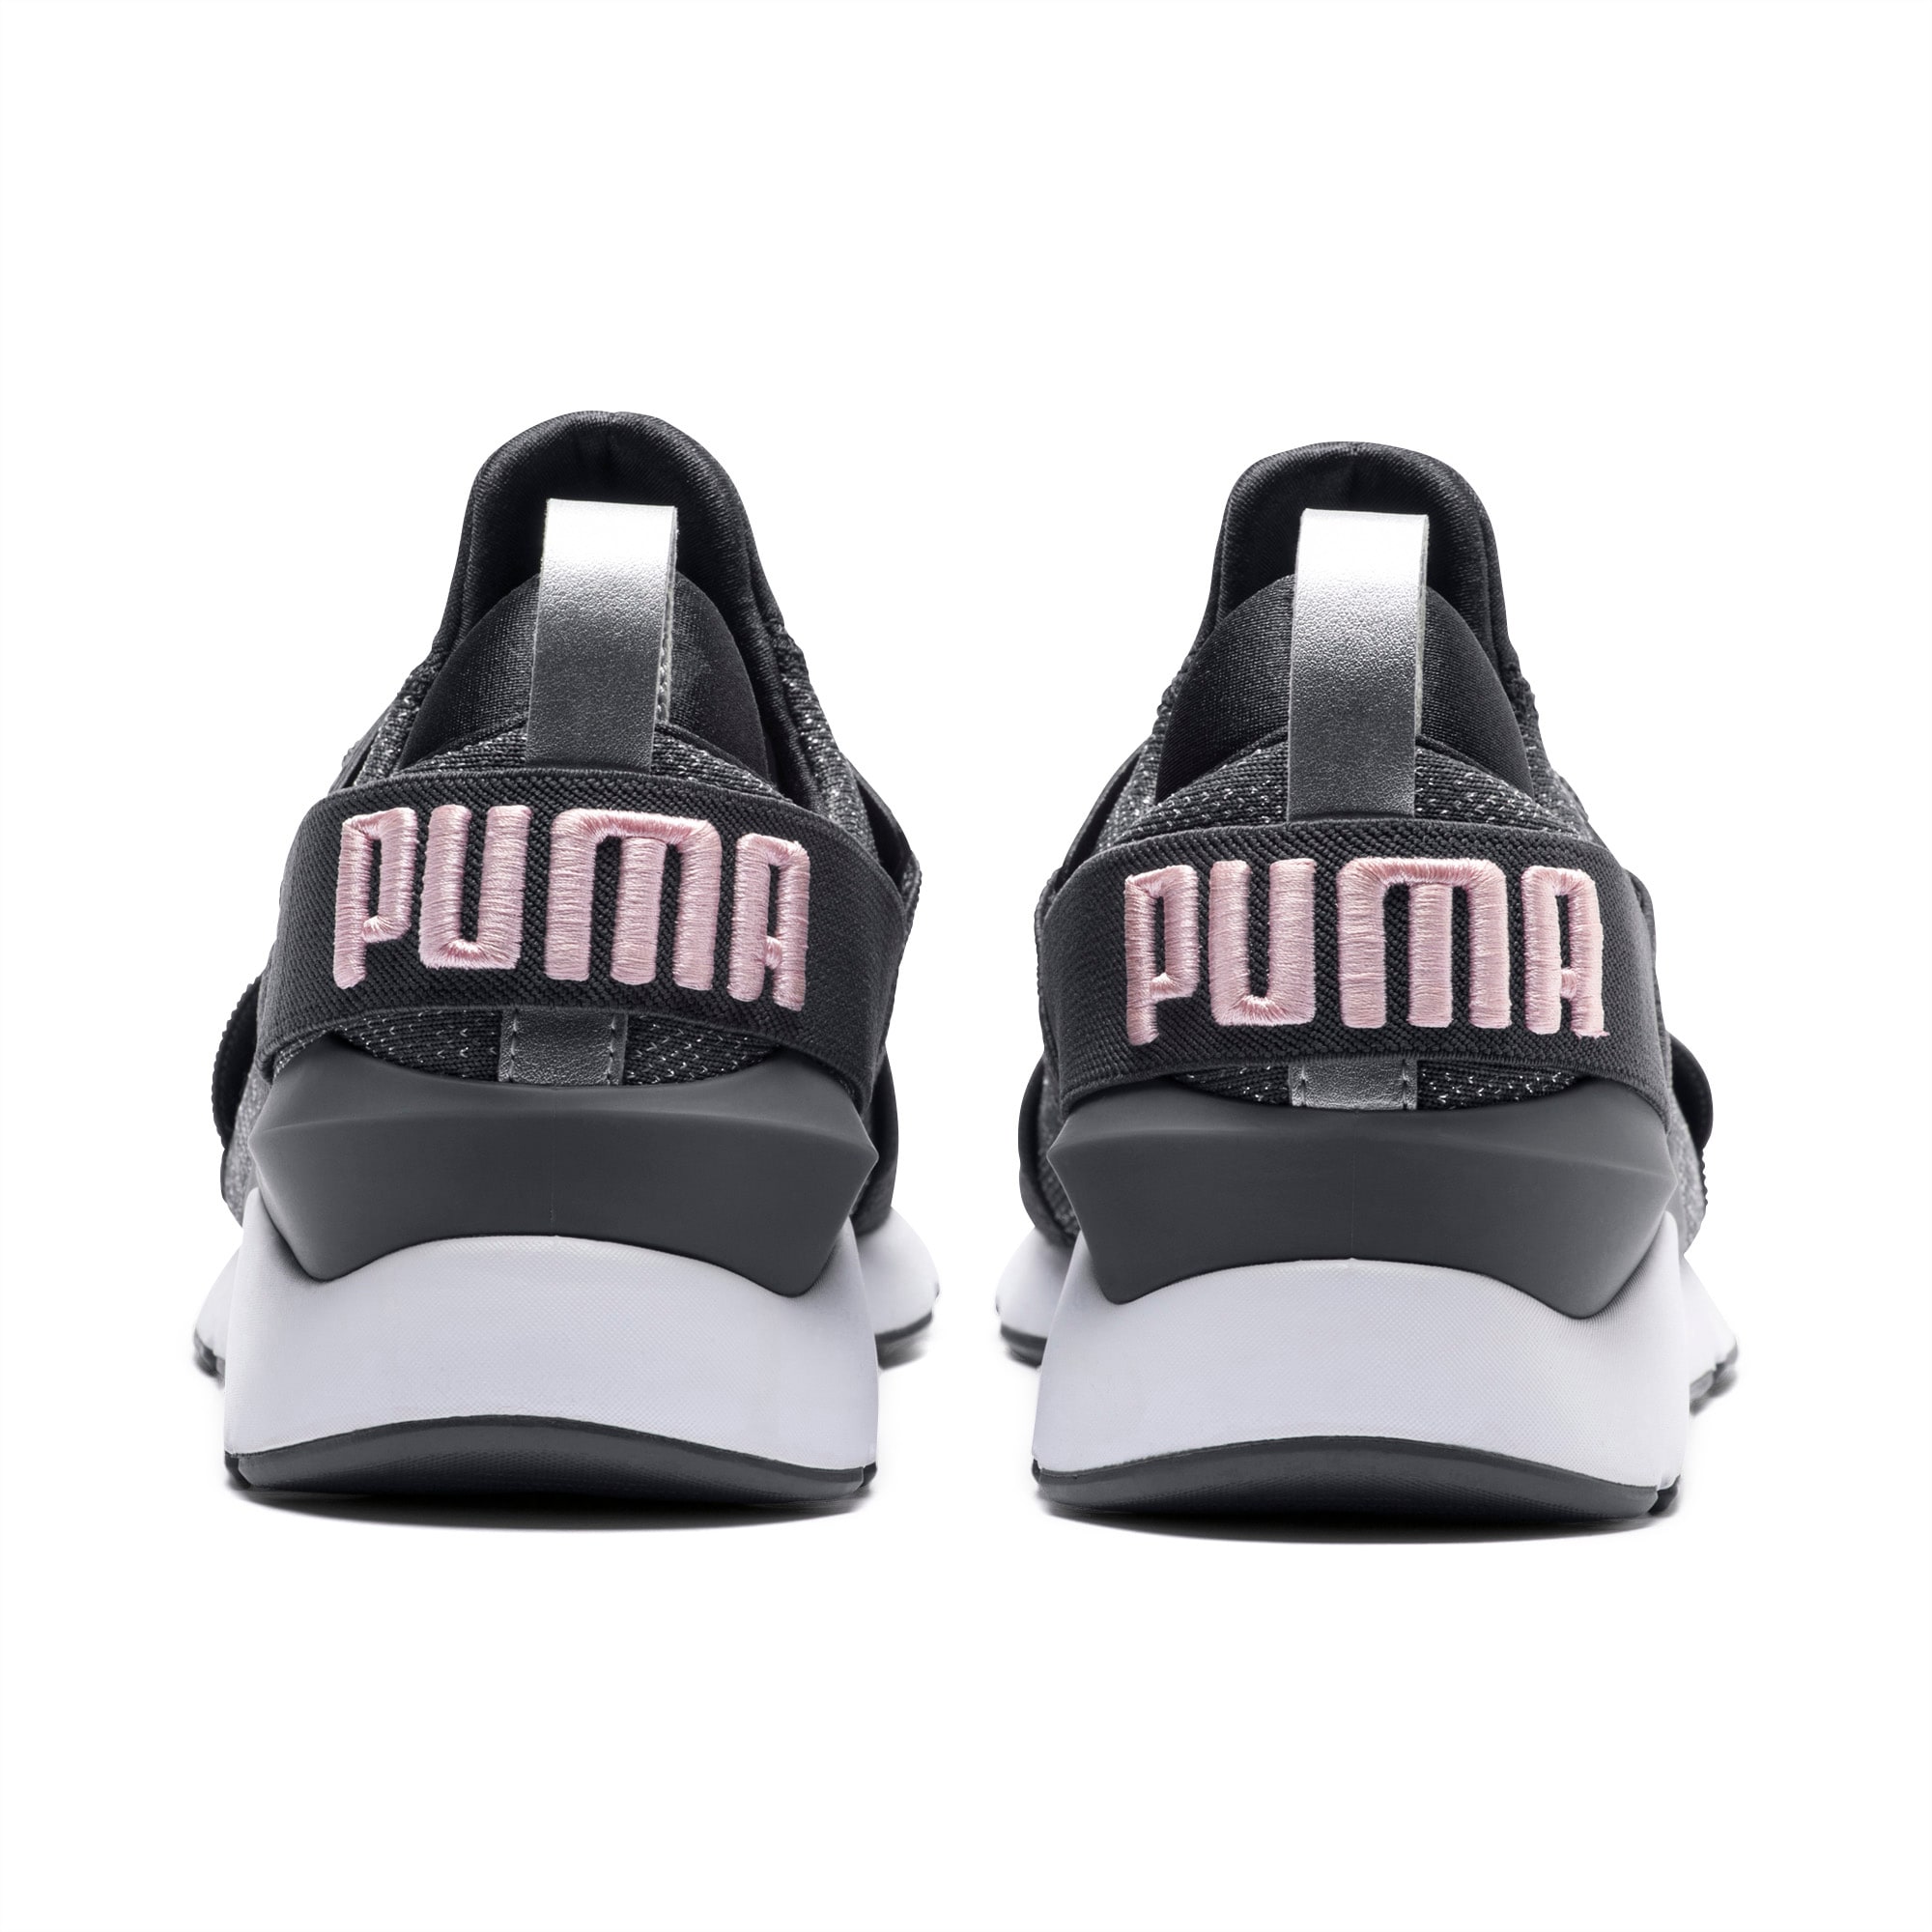 womens puma muse speckle athletic shoe